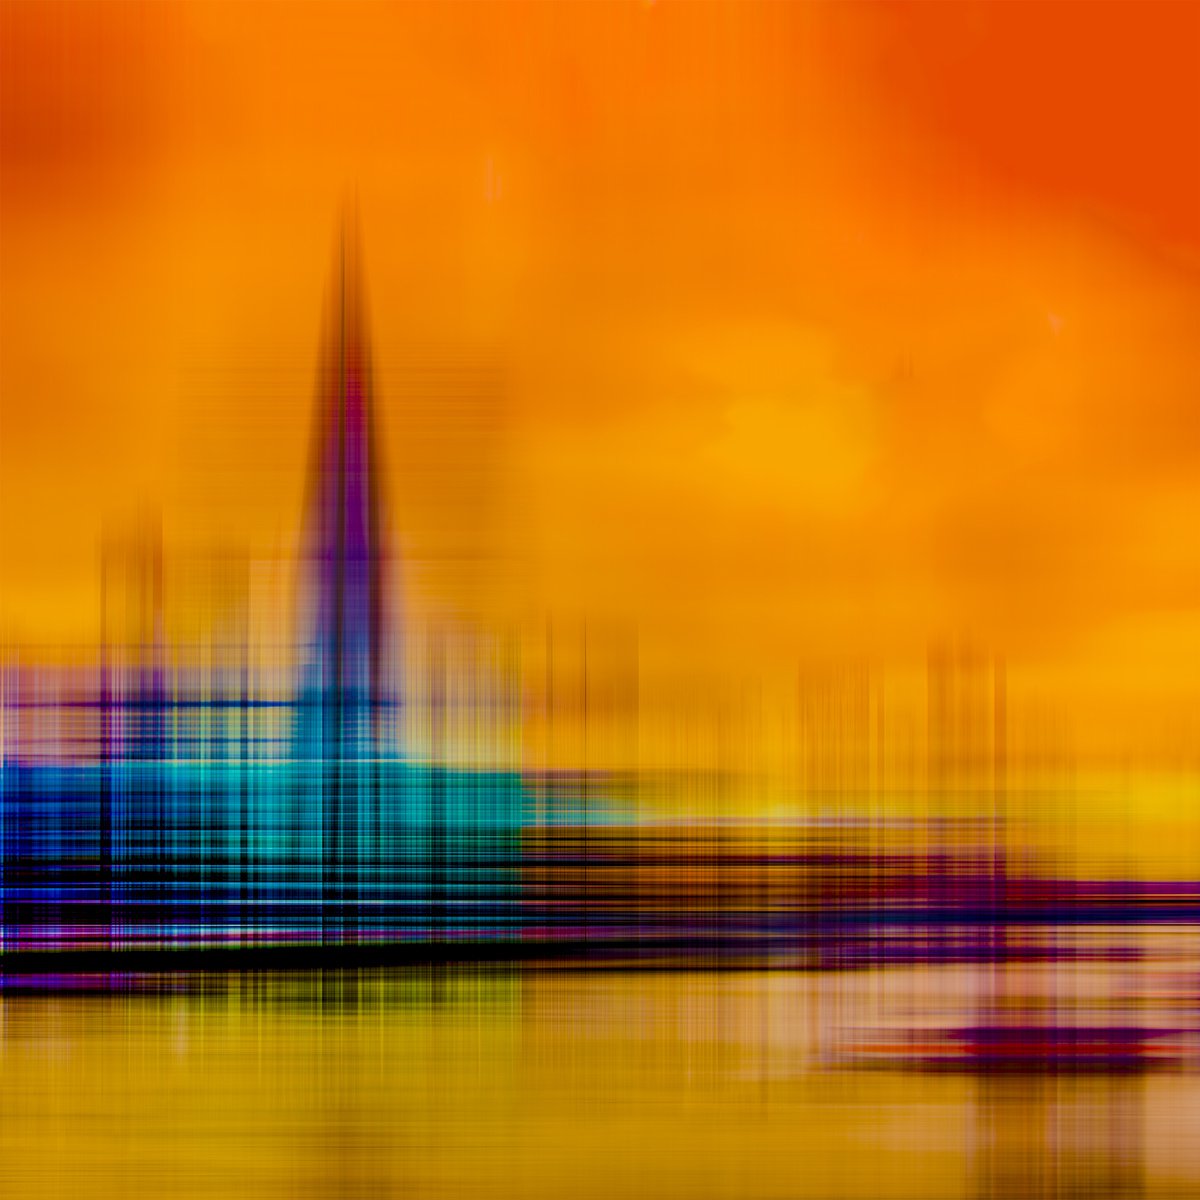 Linear London The Shard Limited Edition #3/50 10x10 inch Photographic Print. by Graham Briggs